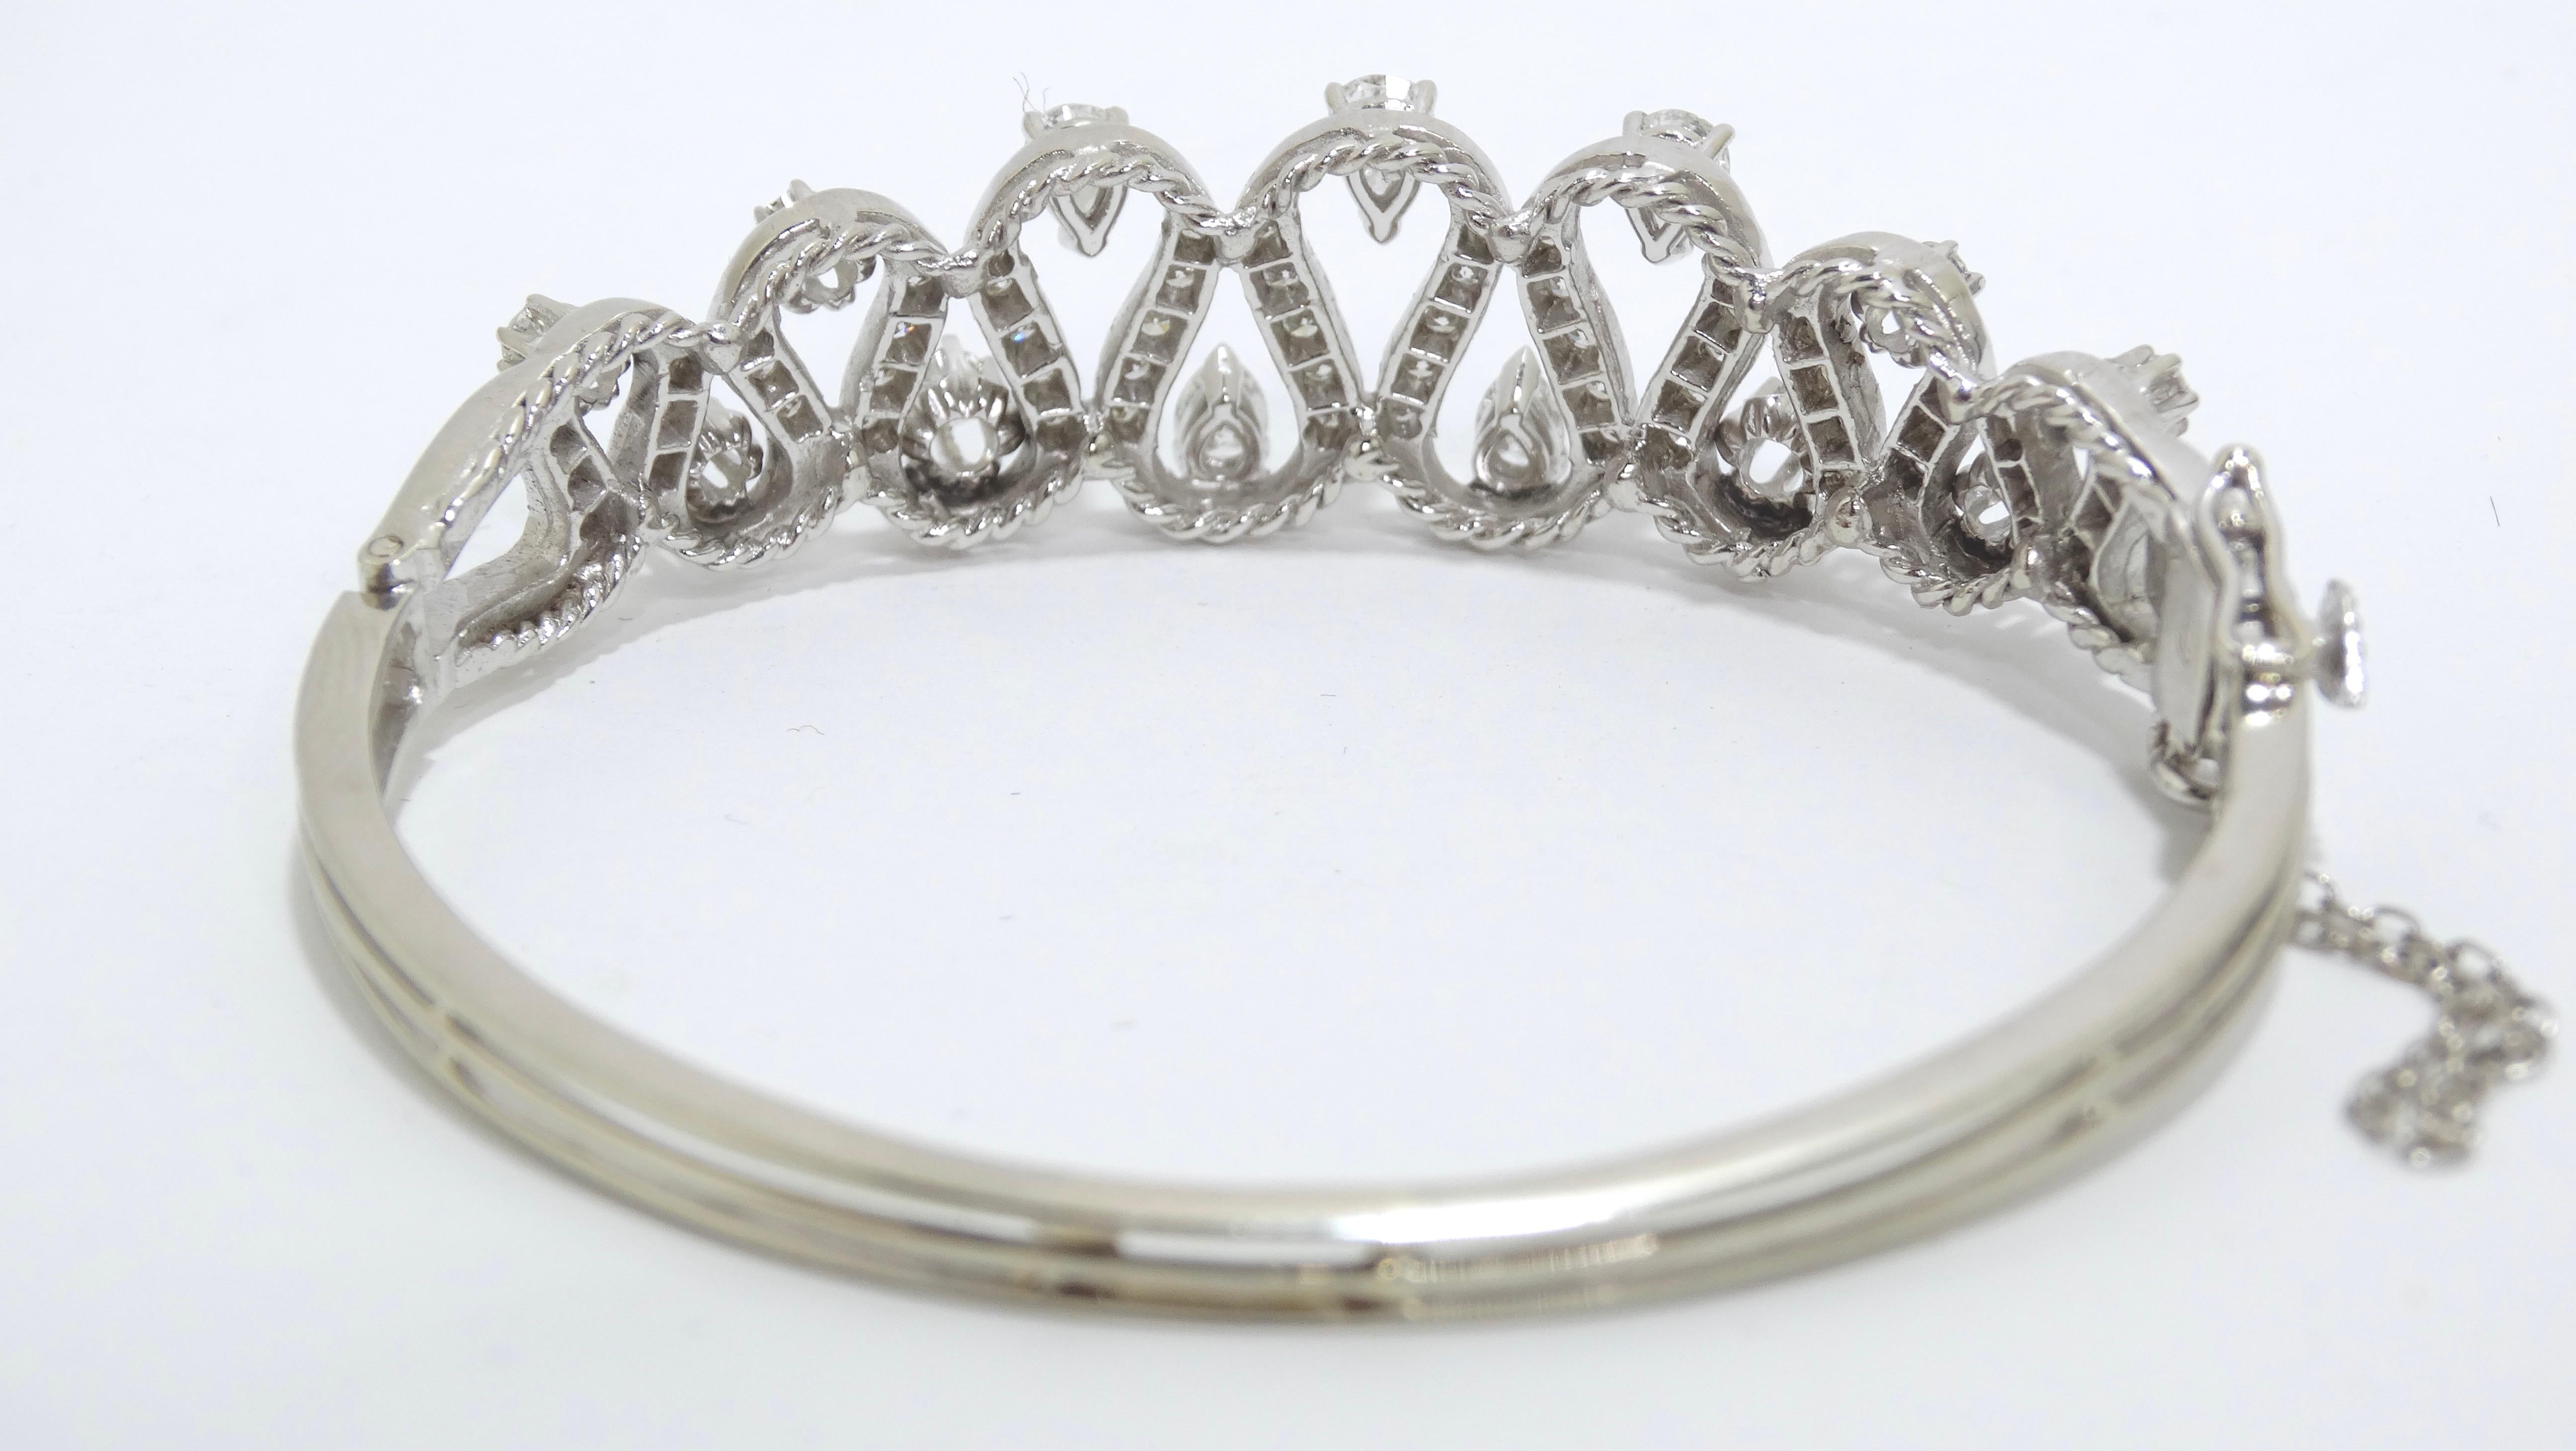 This bracelet will never have you reaching for your plain option again! Beautiful detailing paired with 3ctw Diamonds will be your finishing touch to your future night look. Details include a unique curved detailing and adornments of small and large